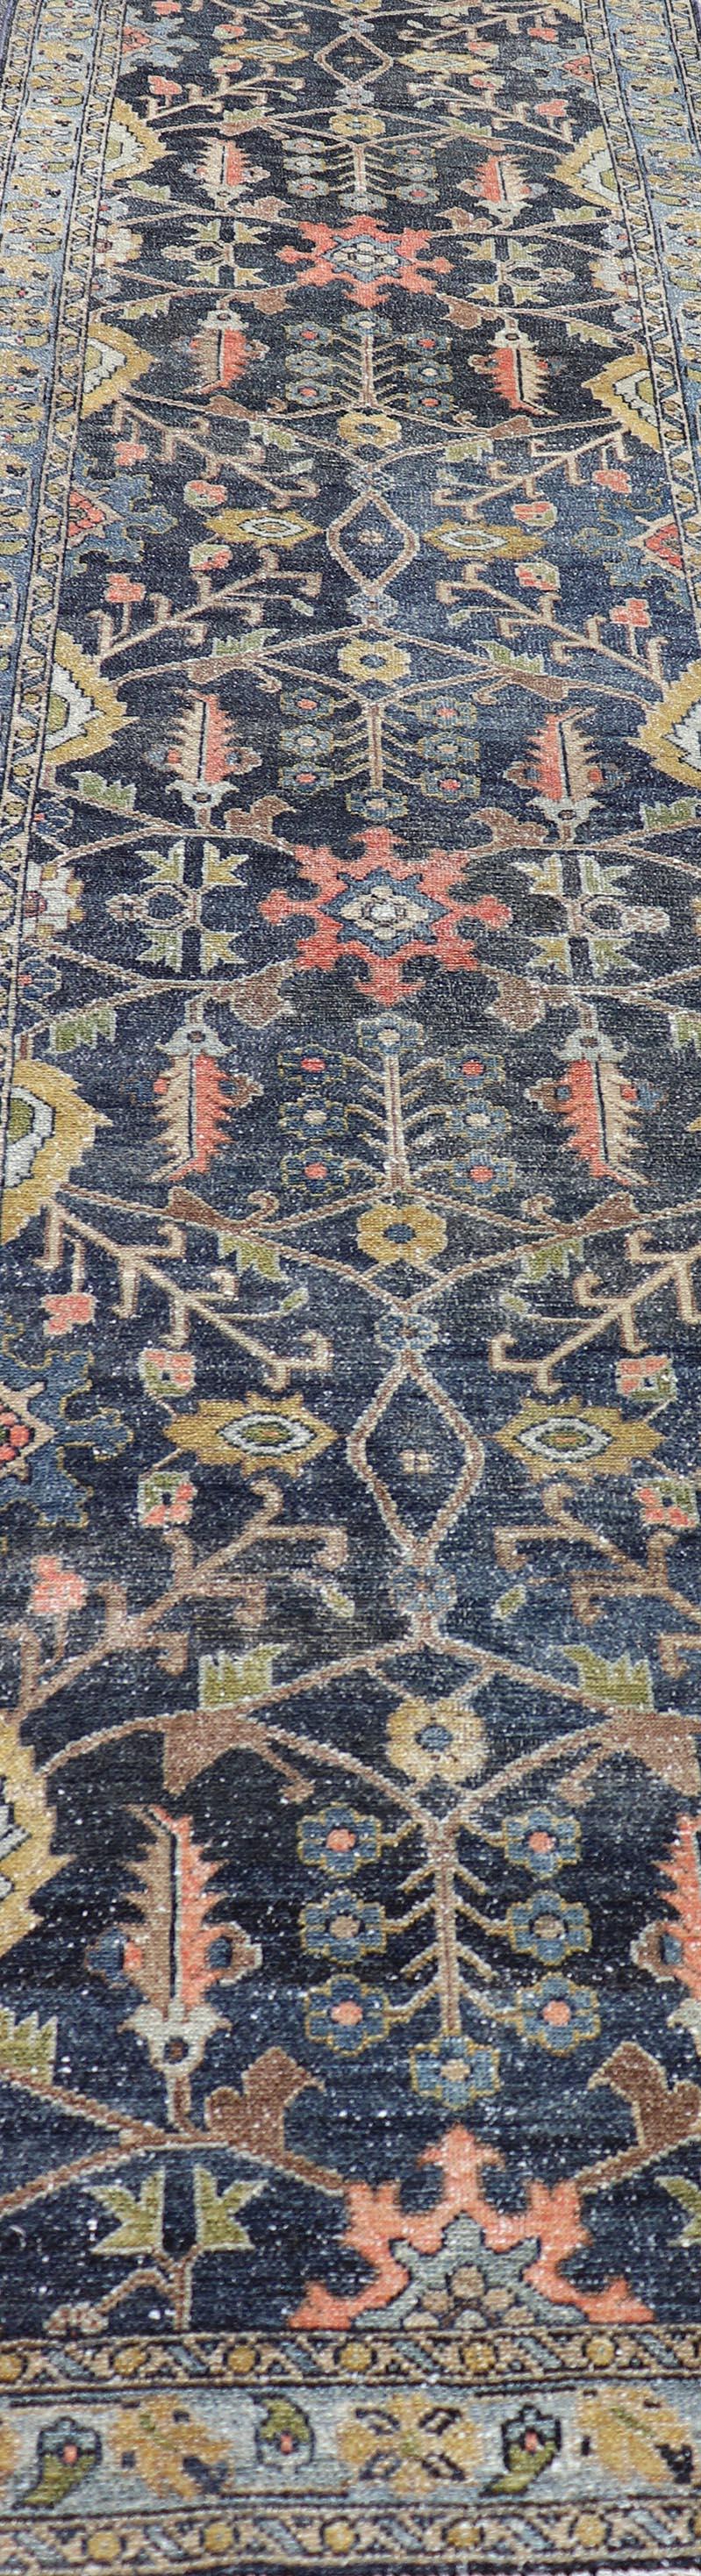 Antique Persian Malayer Tribal Runner in Steal Gray Blue, Green, Gold & Coral  For Sale 4